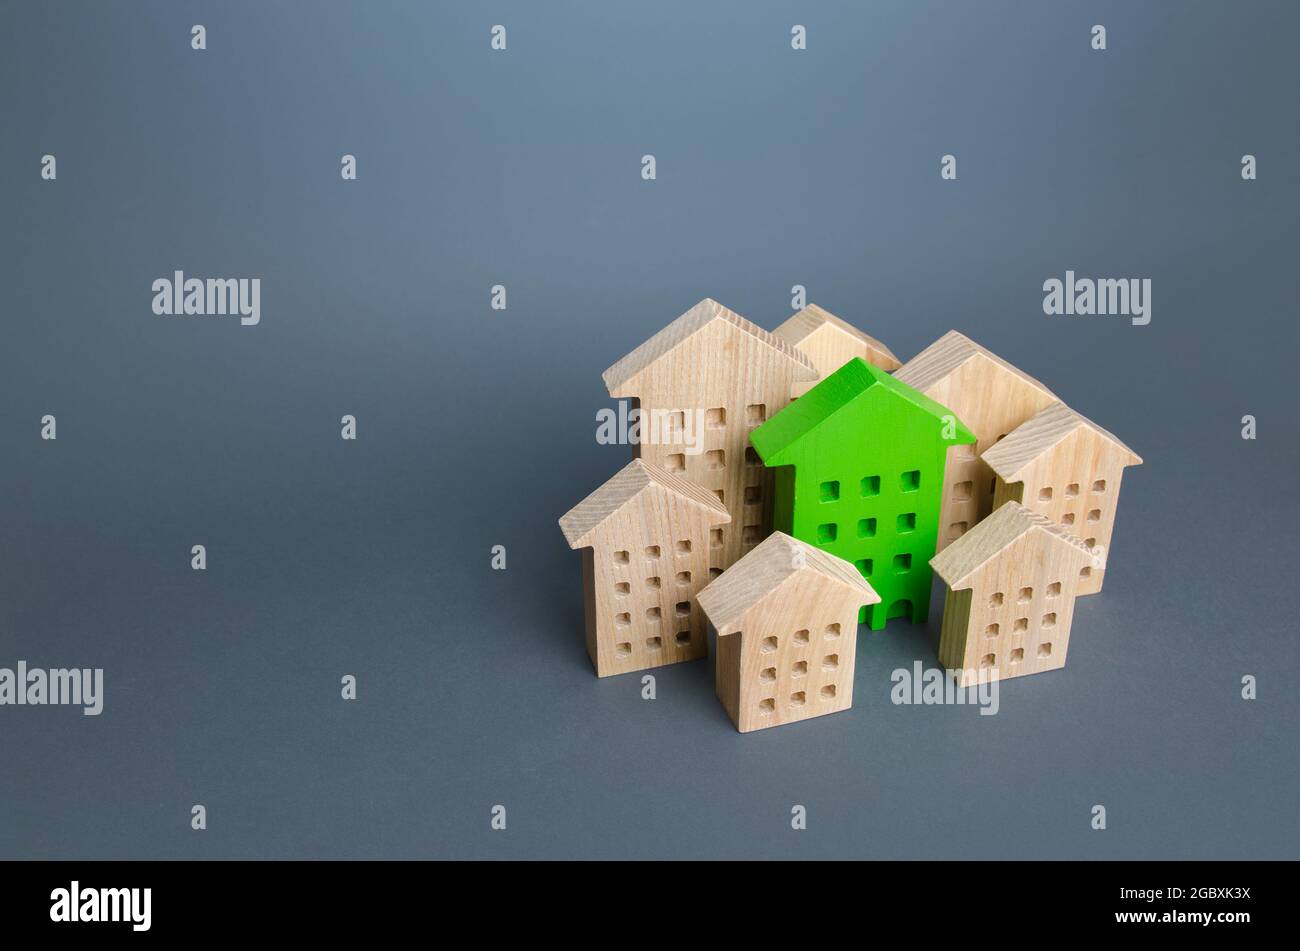 The green building stands out among the houses. Search for the best option. Ideal property to buy. Net Zero Carbon neutrality. Environmentally friendl Stock Photo